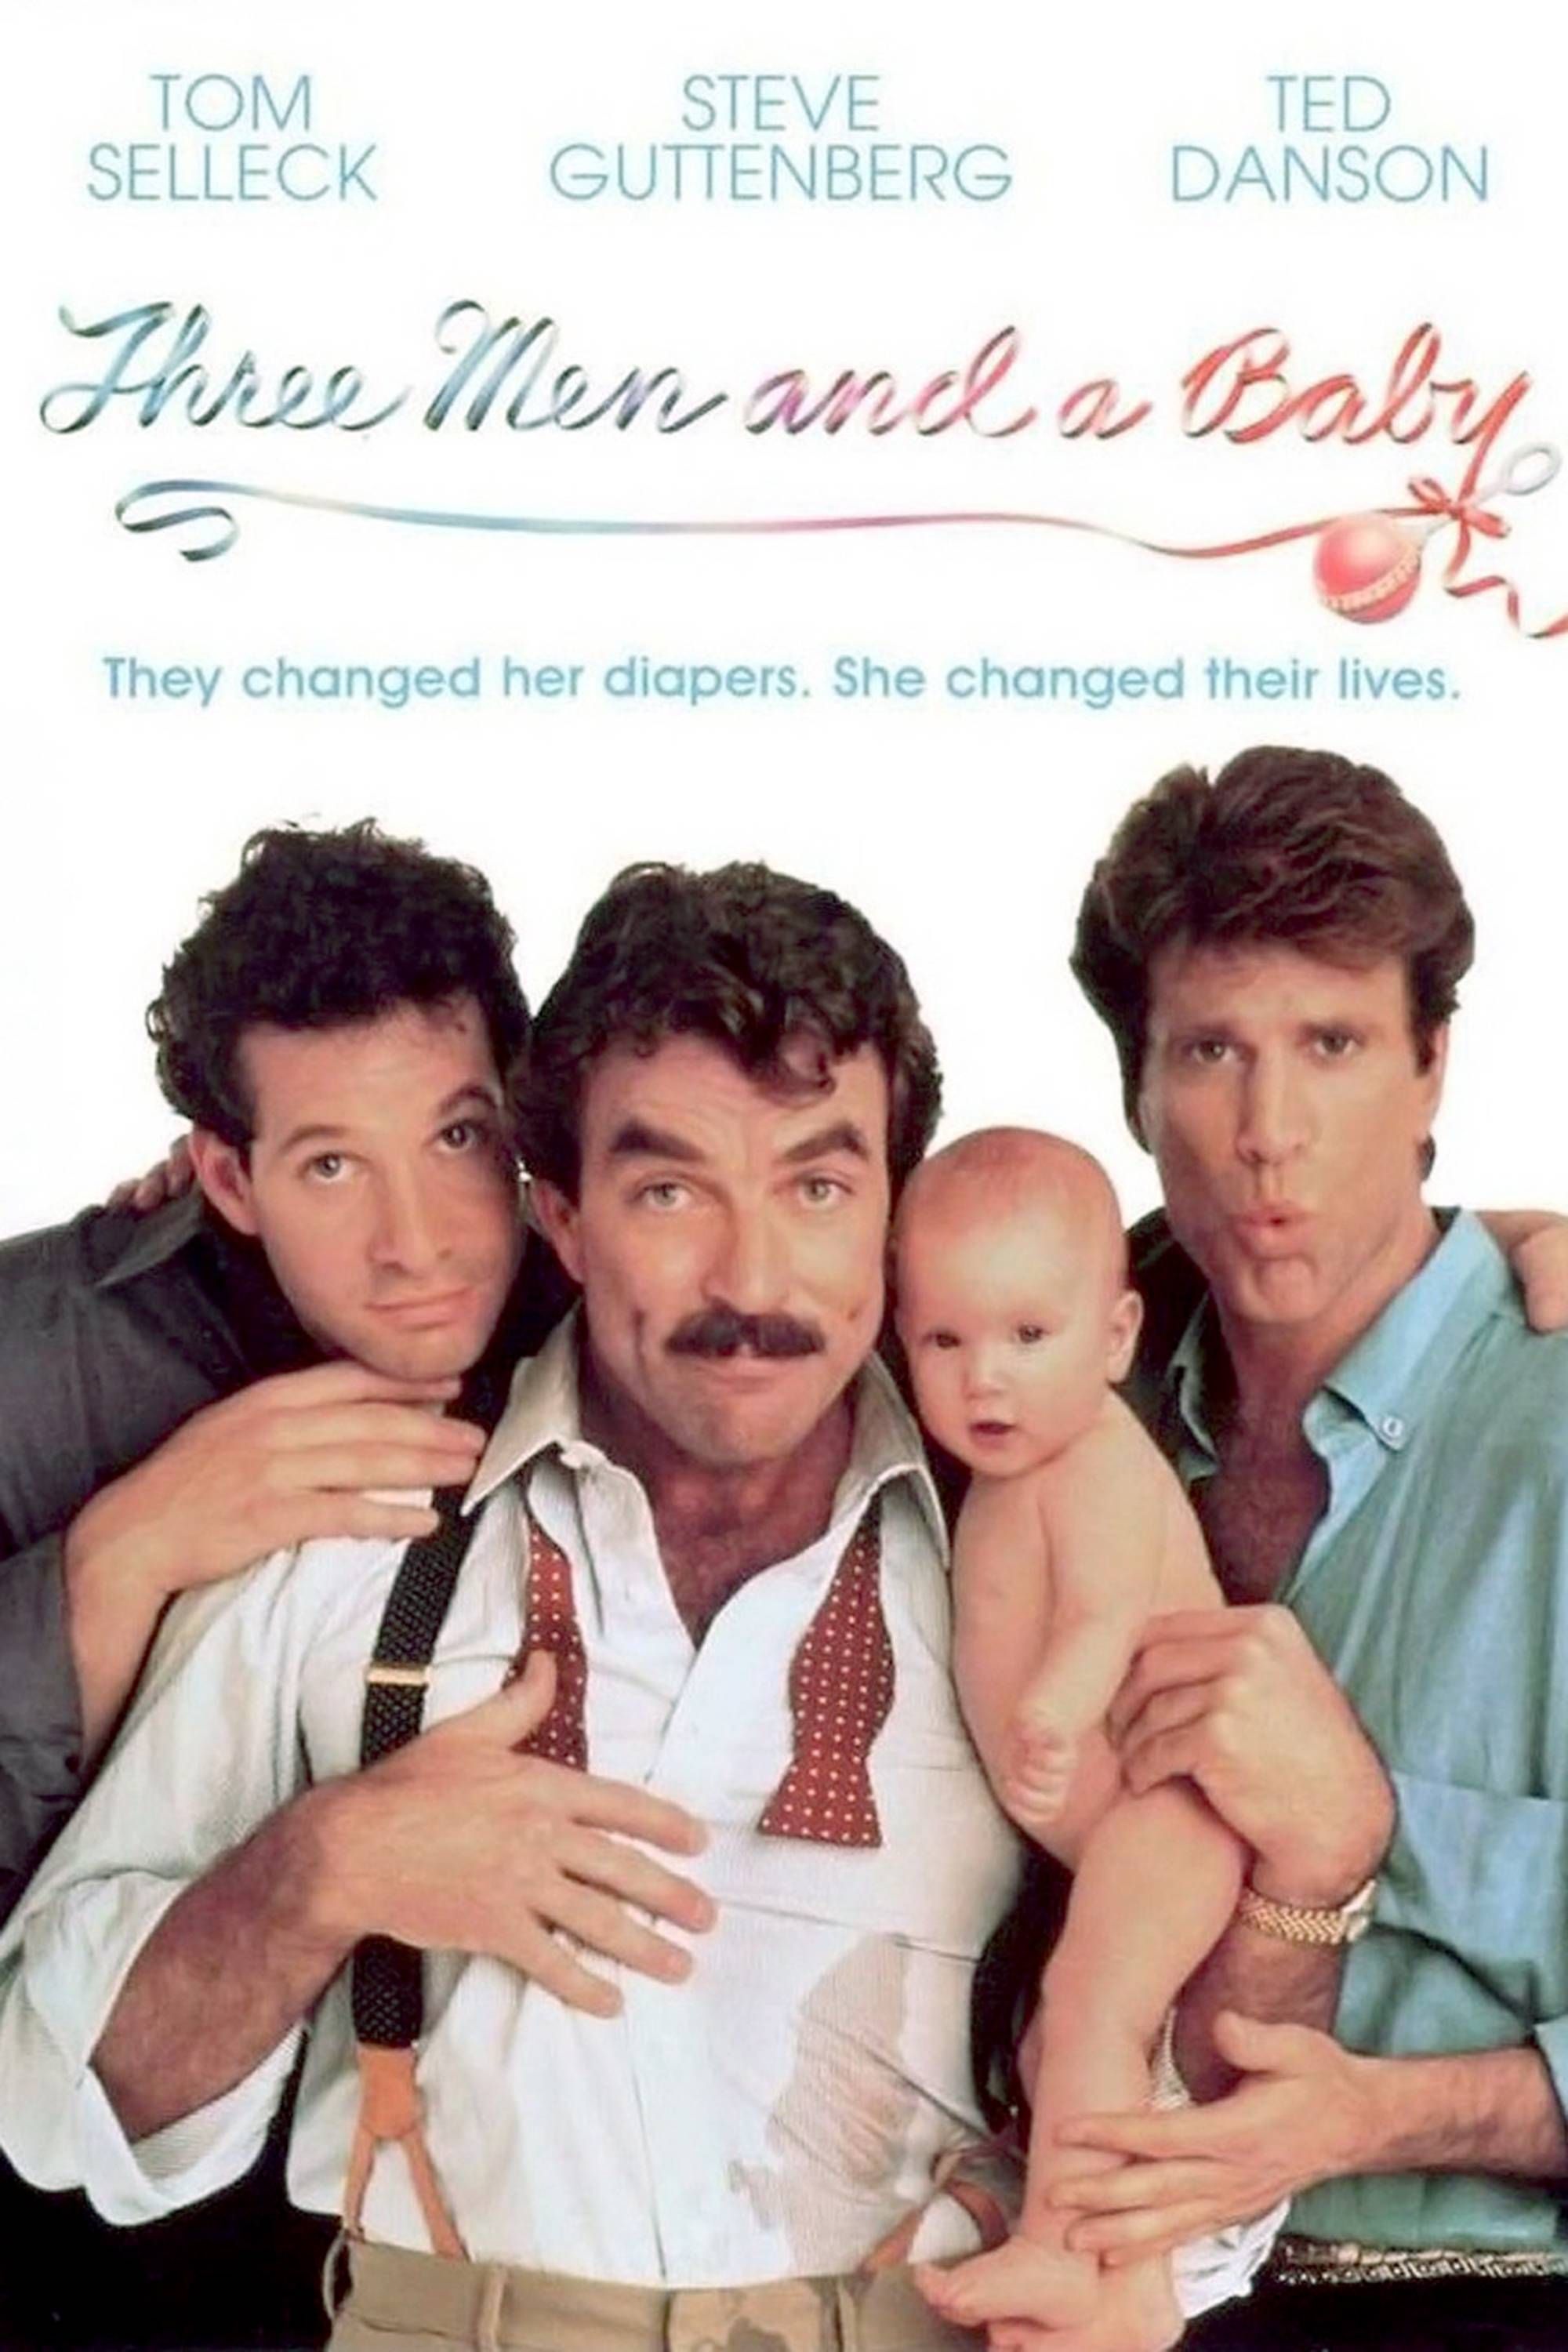 three men and a baby poster